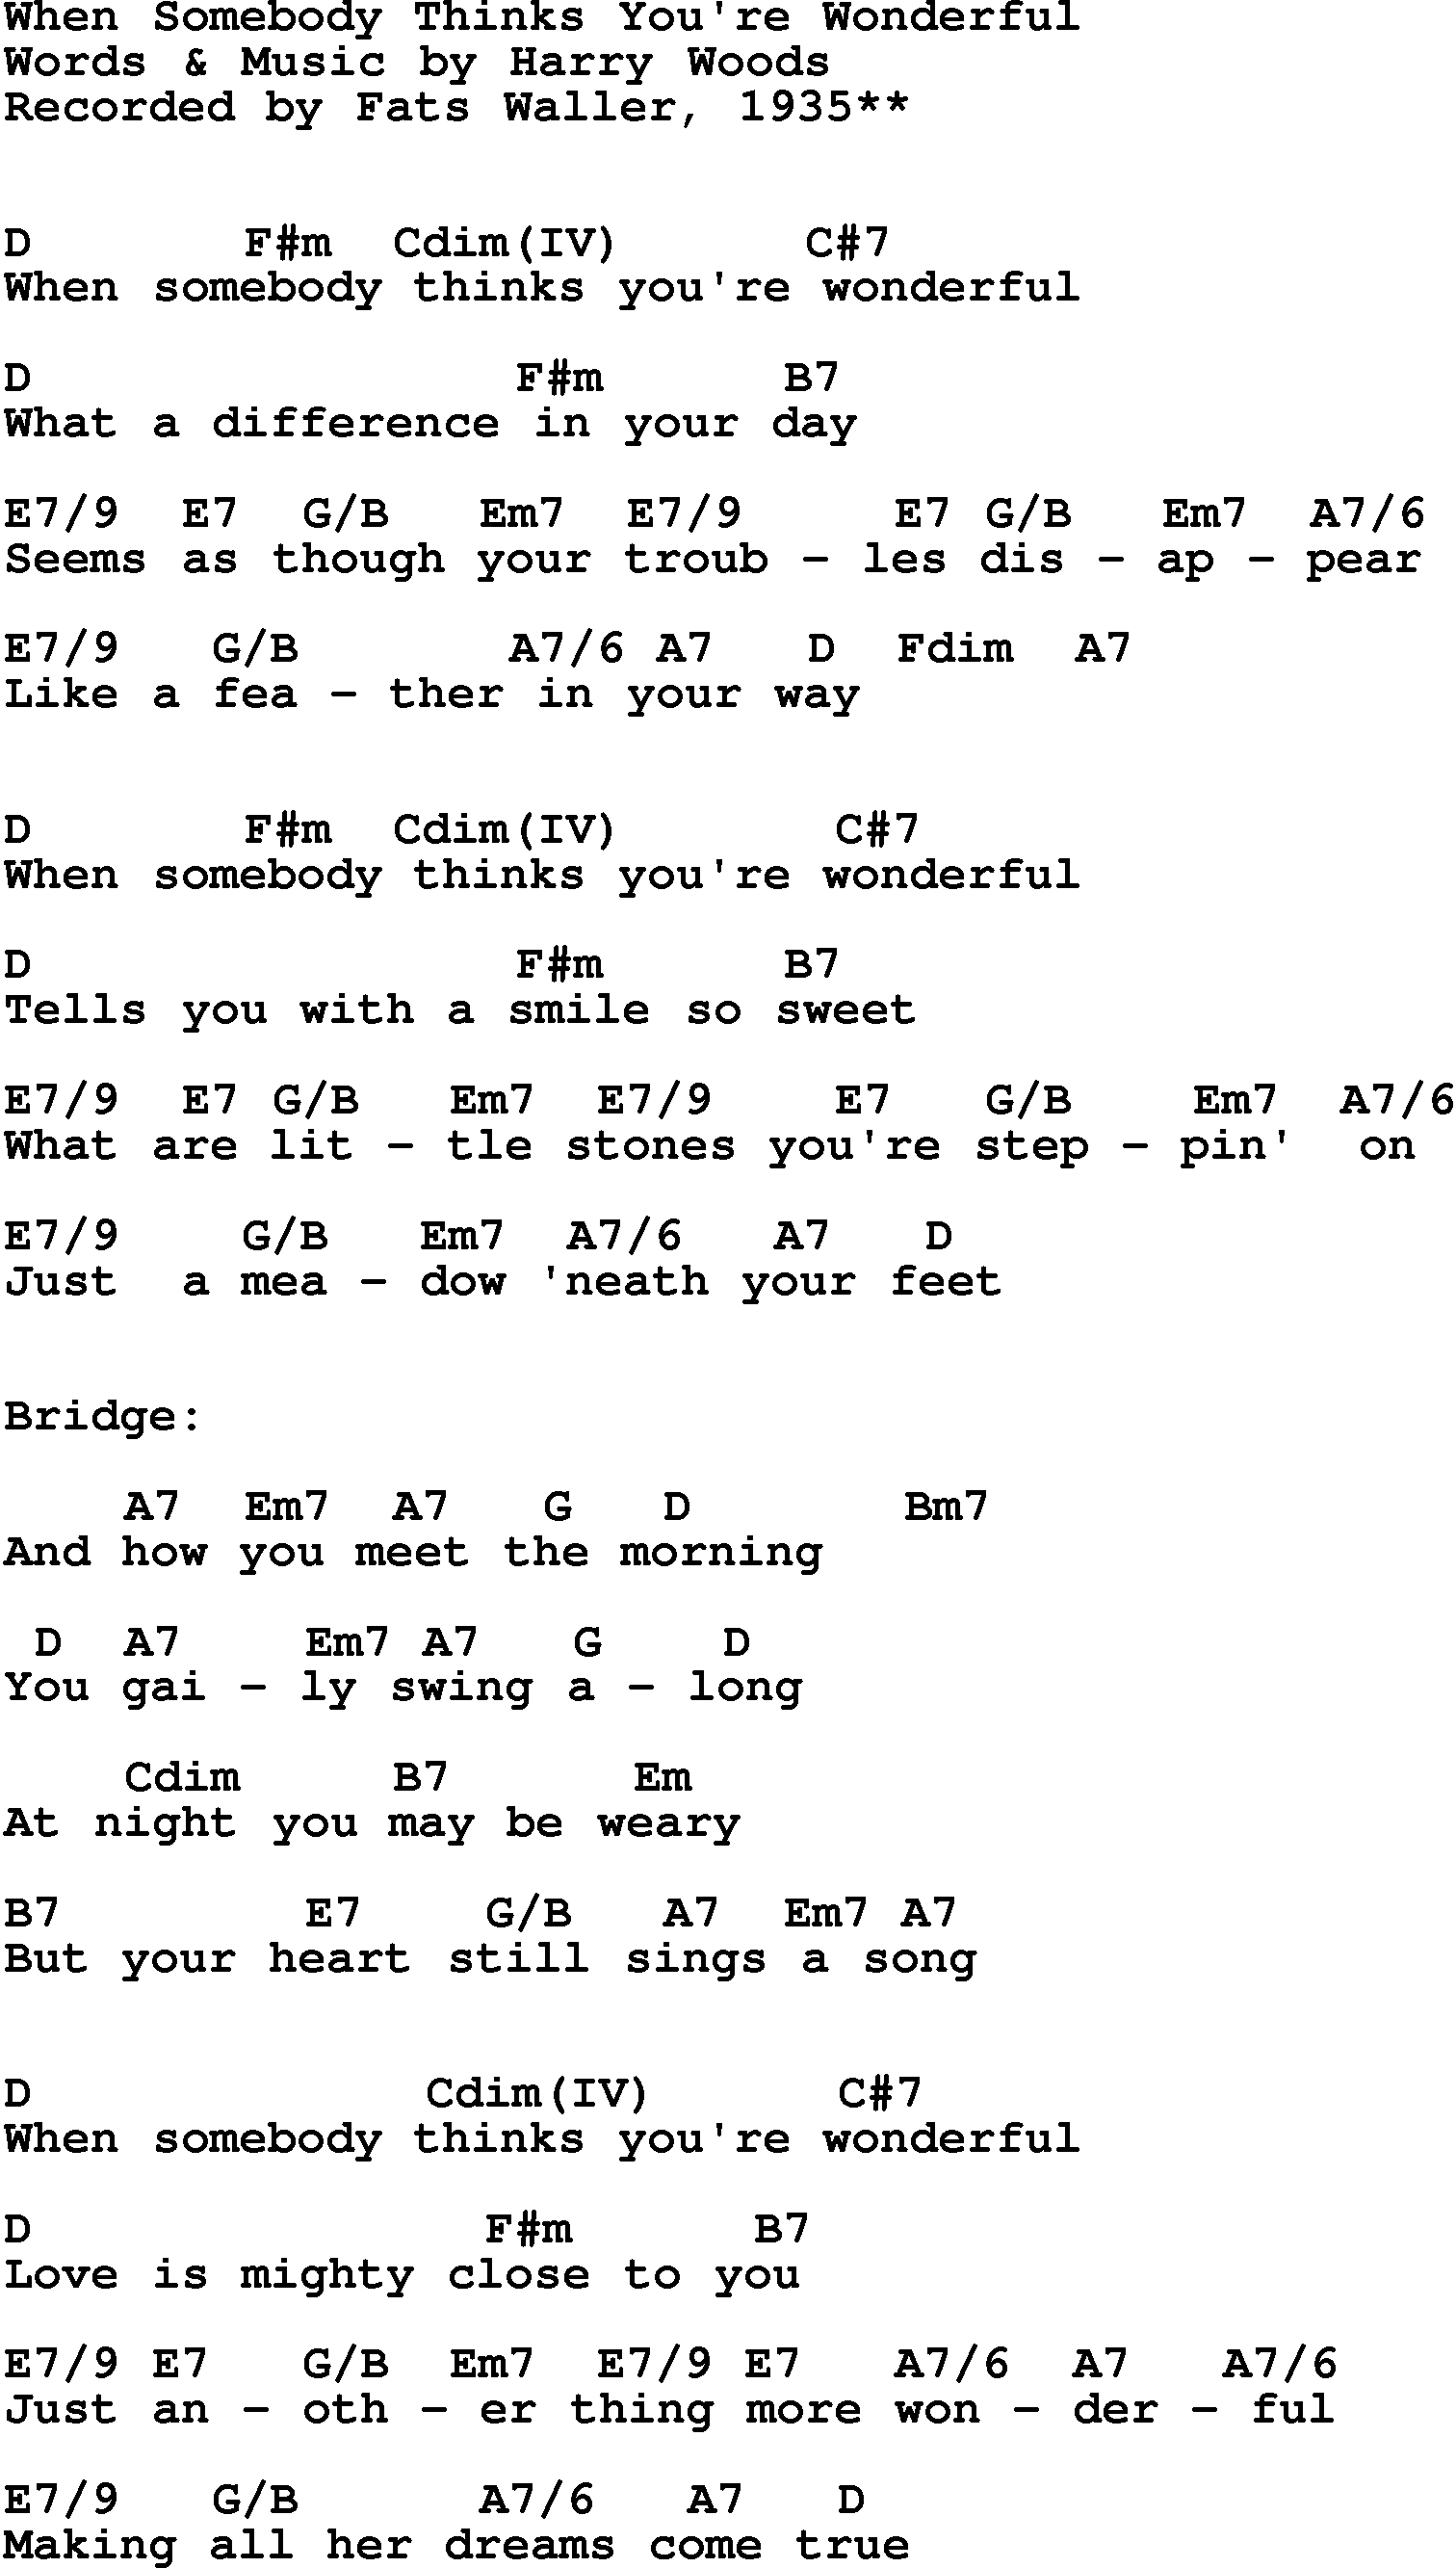 Song Lyrics with guitar chords for When Somebody Thinks You're Wonderful - Fats Waller, 1935